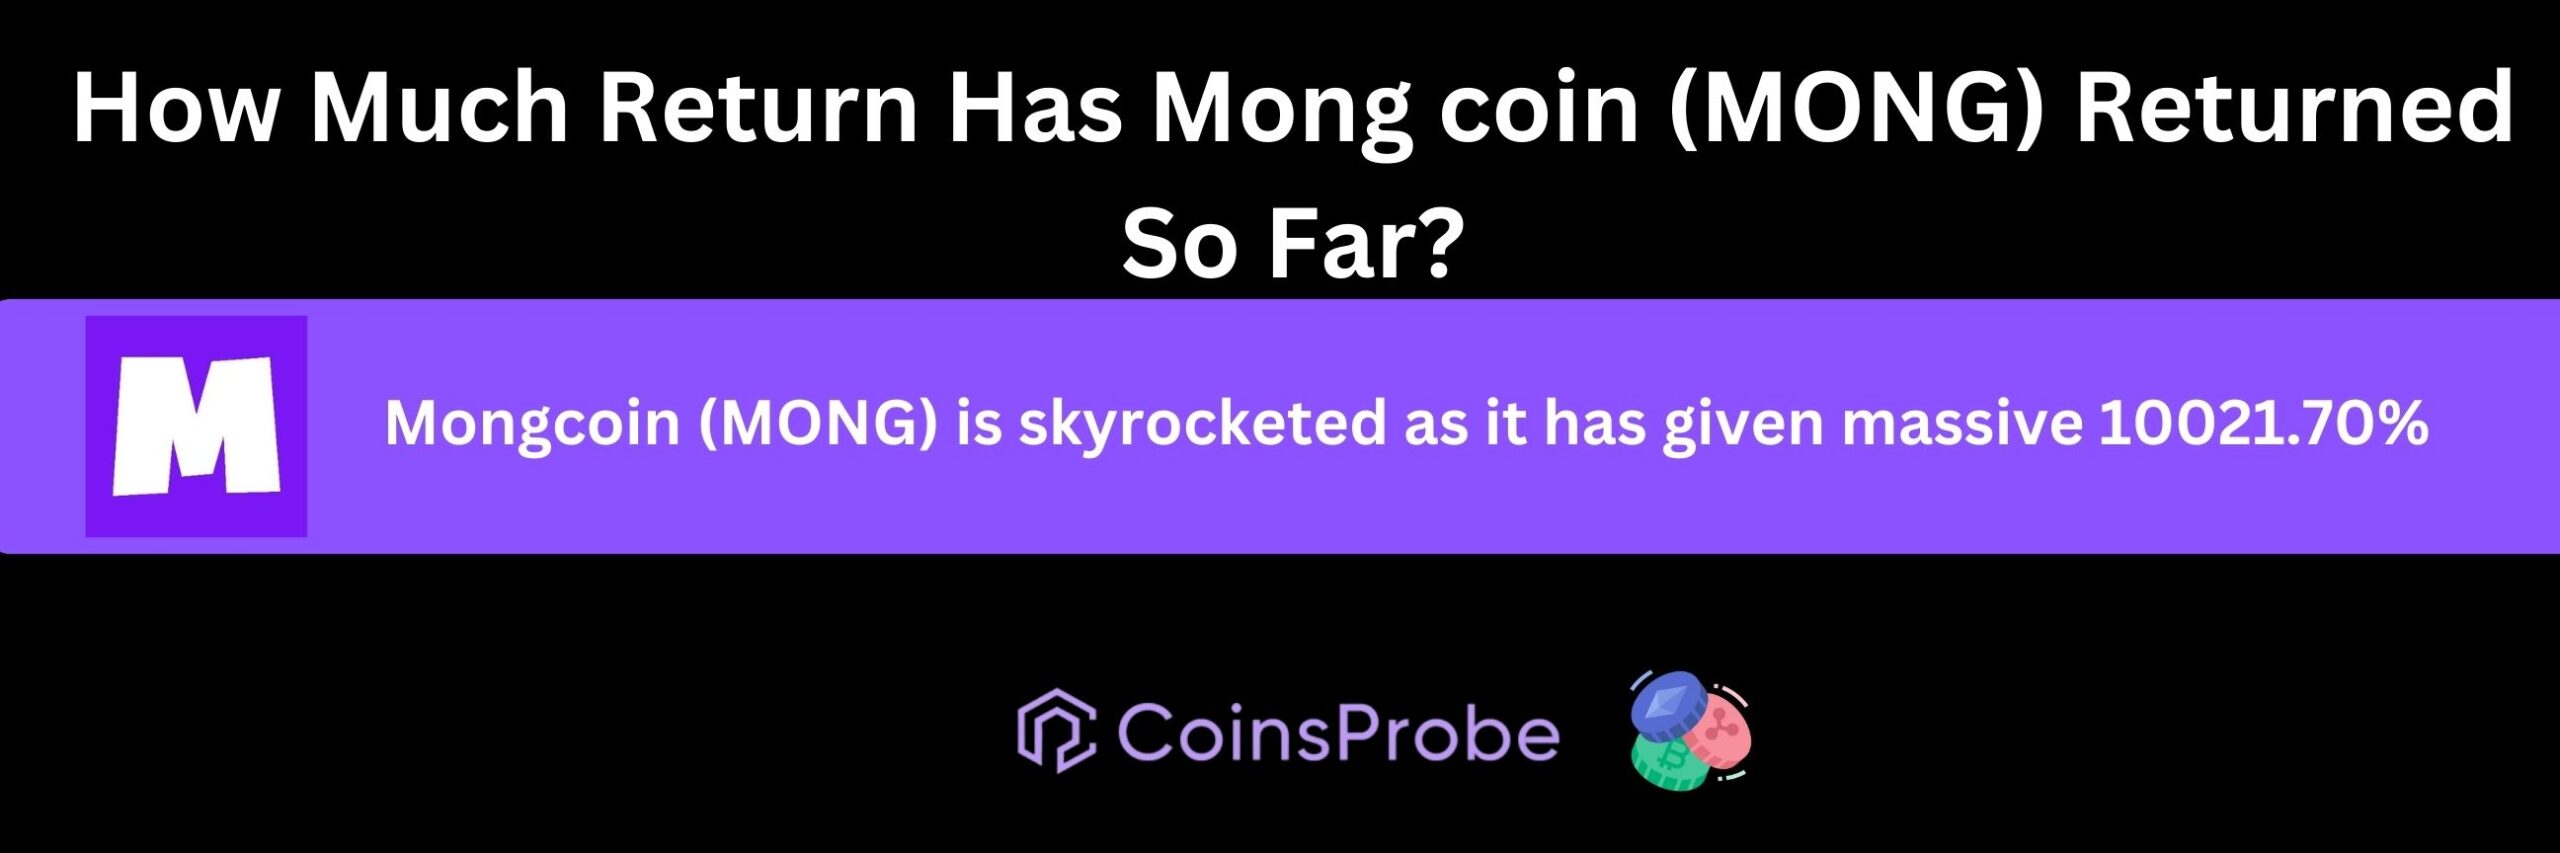 Mongcoin (MONG) is skyrocketed as it has given massive 10021.70%